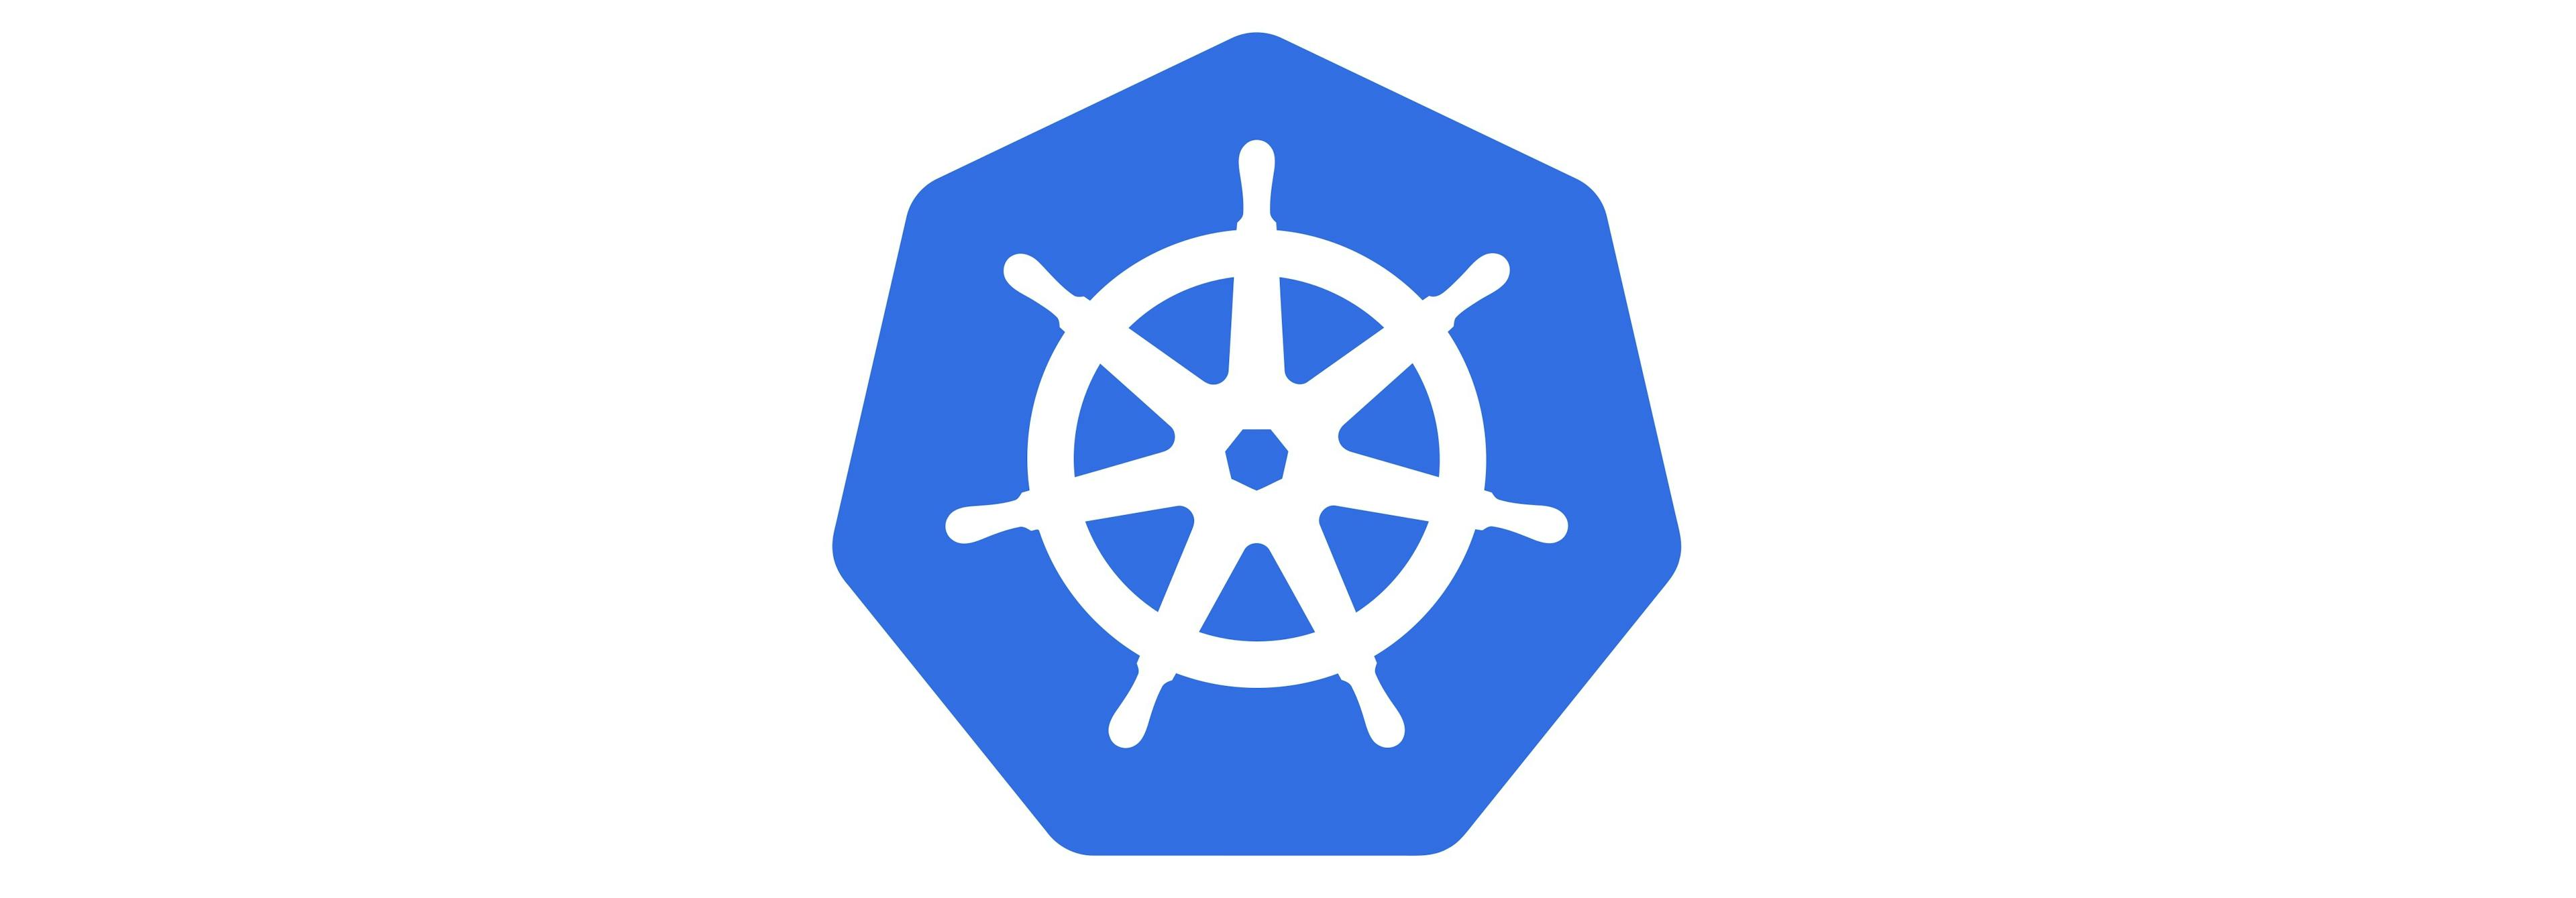 How to install Kubernetes with Microk8s and Rancher